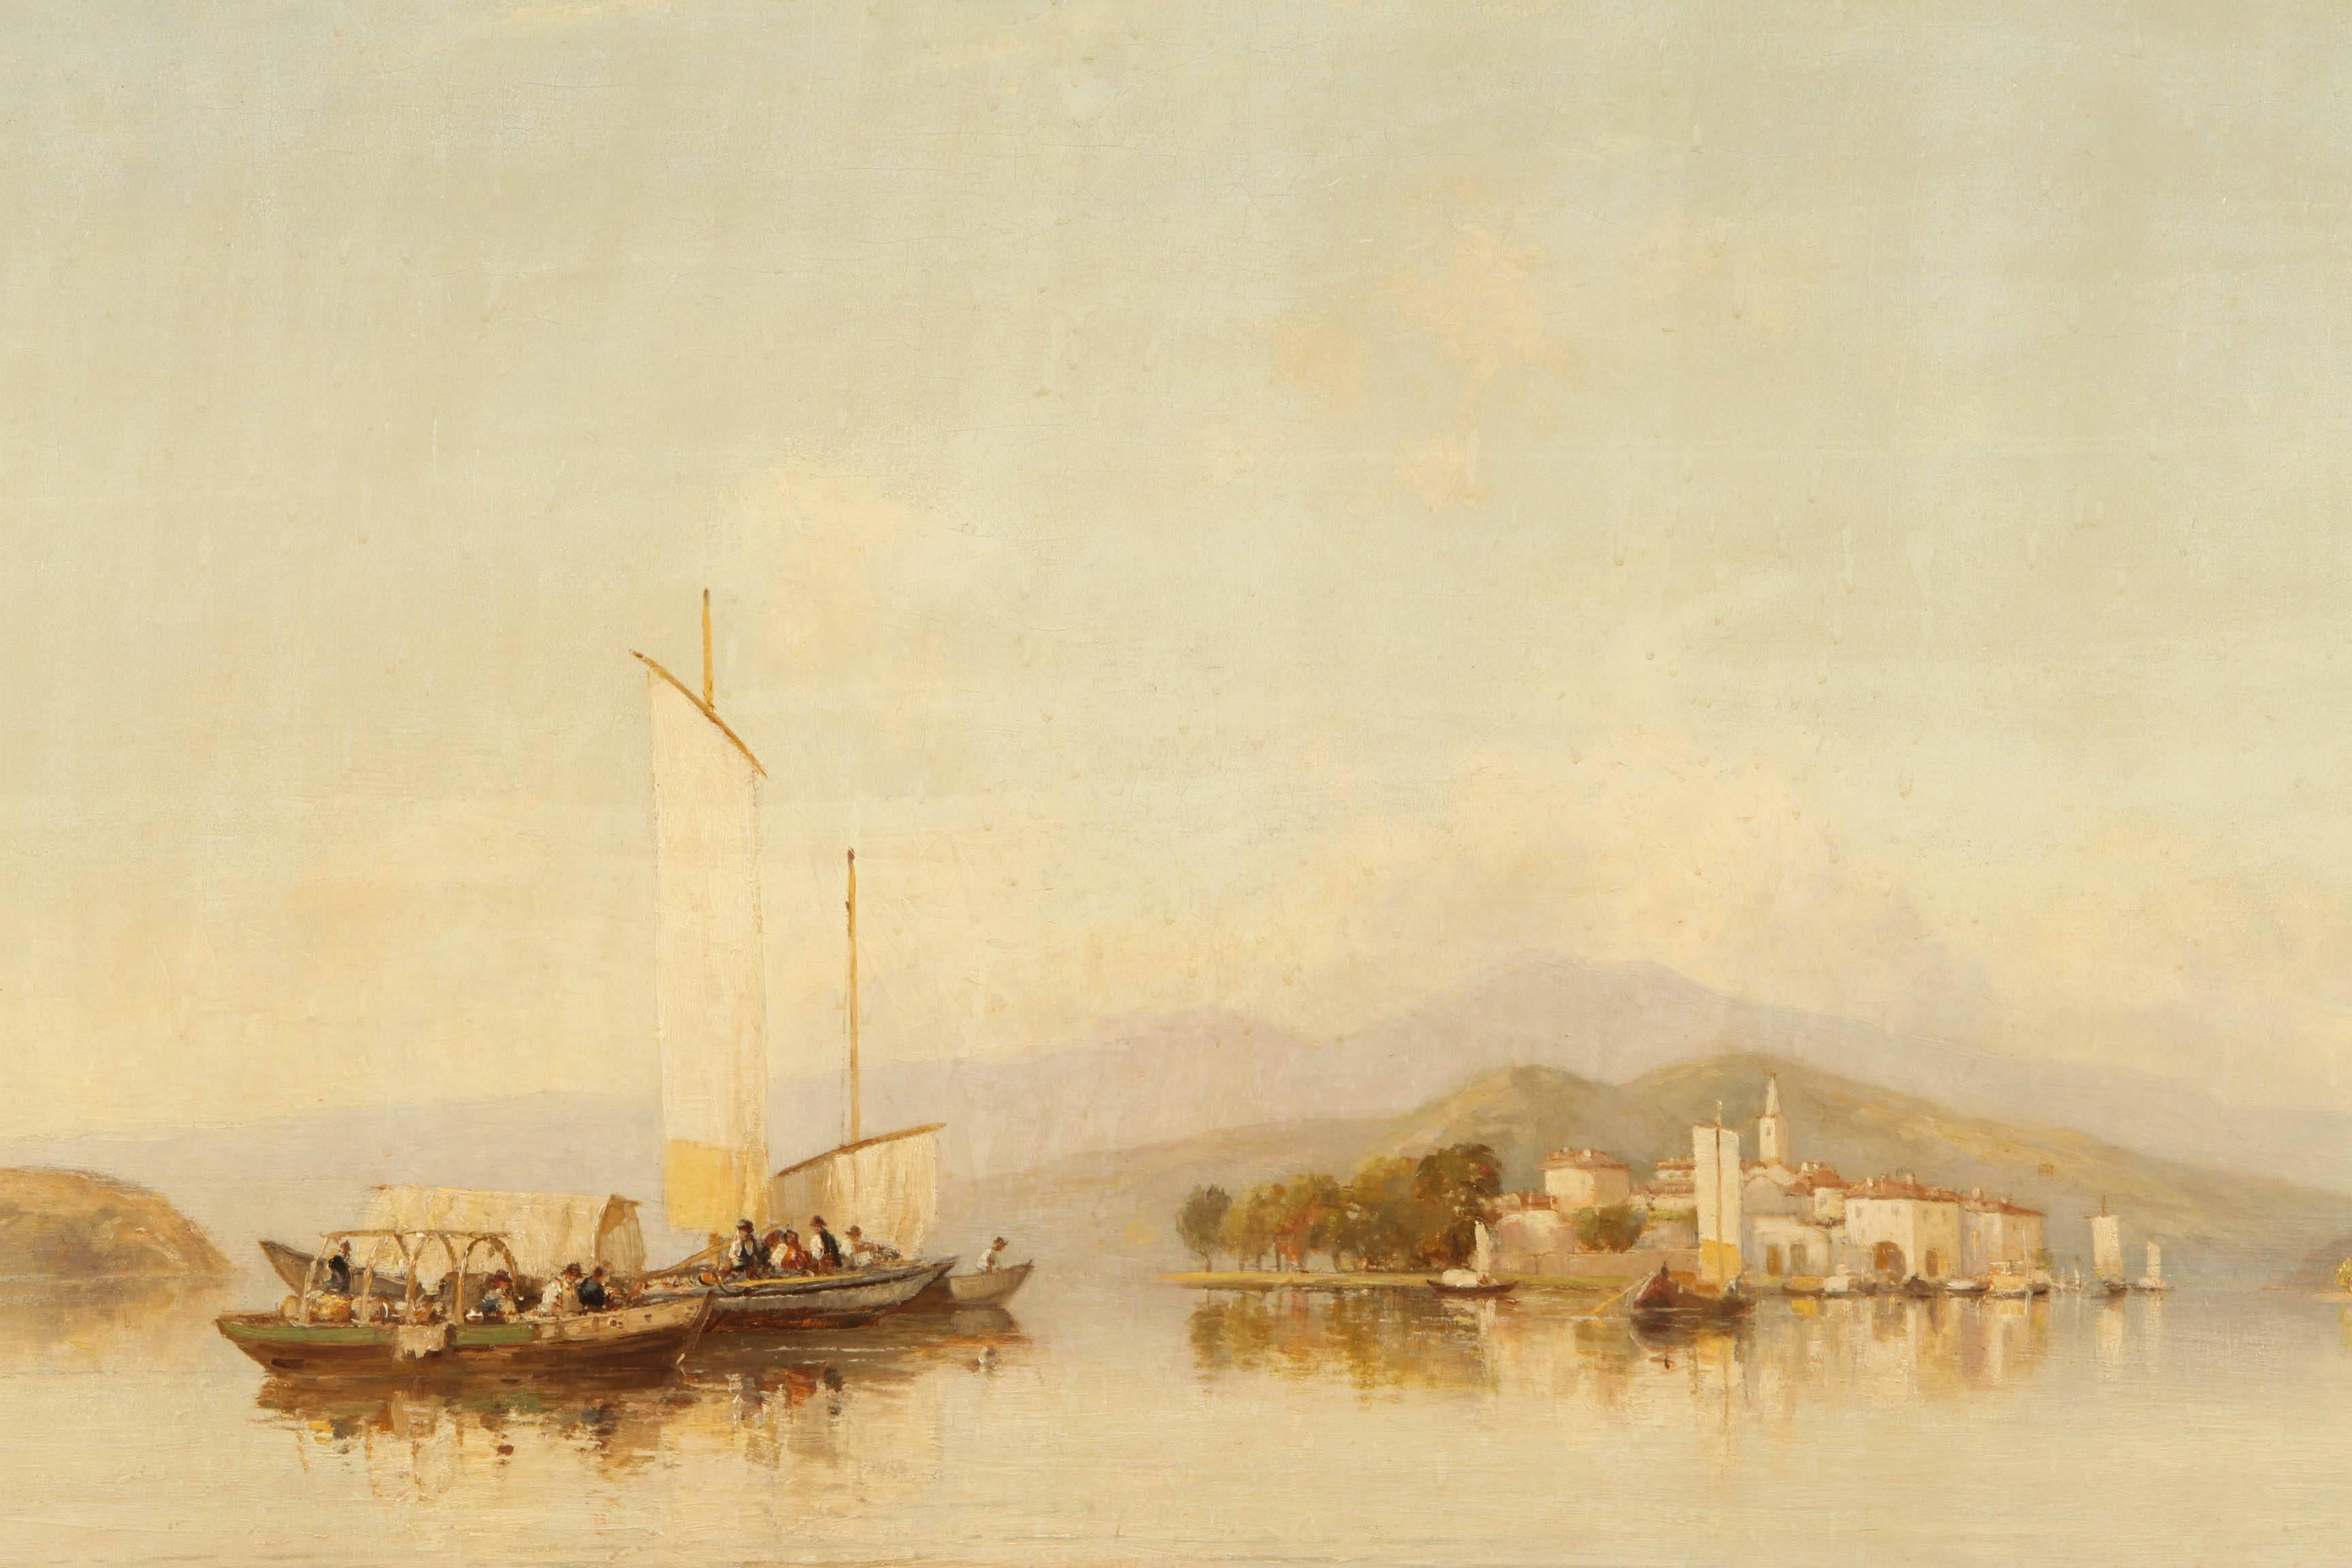 John Varley (1778-1842, English) LAGO MAGGIORE The painting depicts ships in a bay, in a tranquil setting of barges with sails floating on the water next to a town with trees, with mountains in the distance.